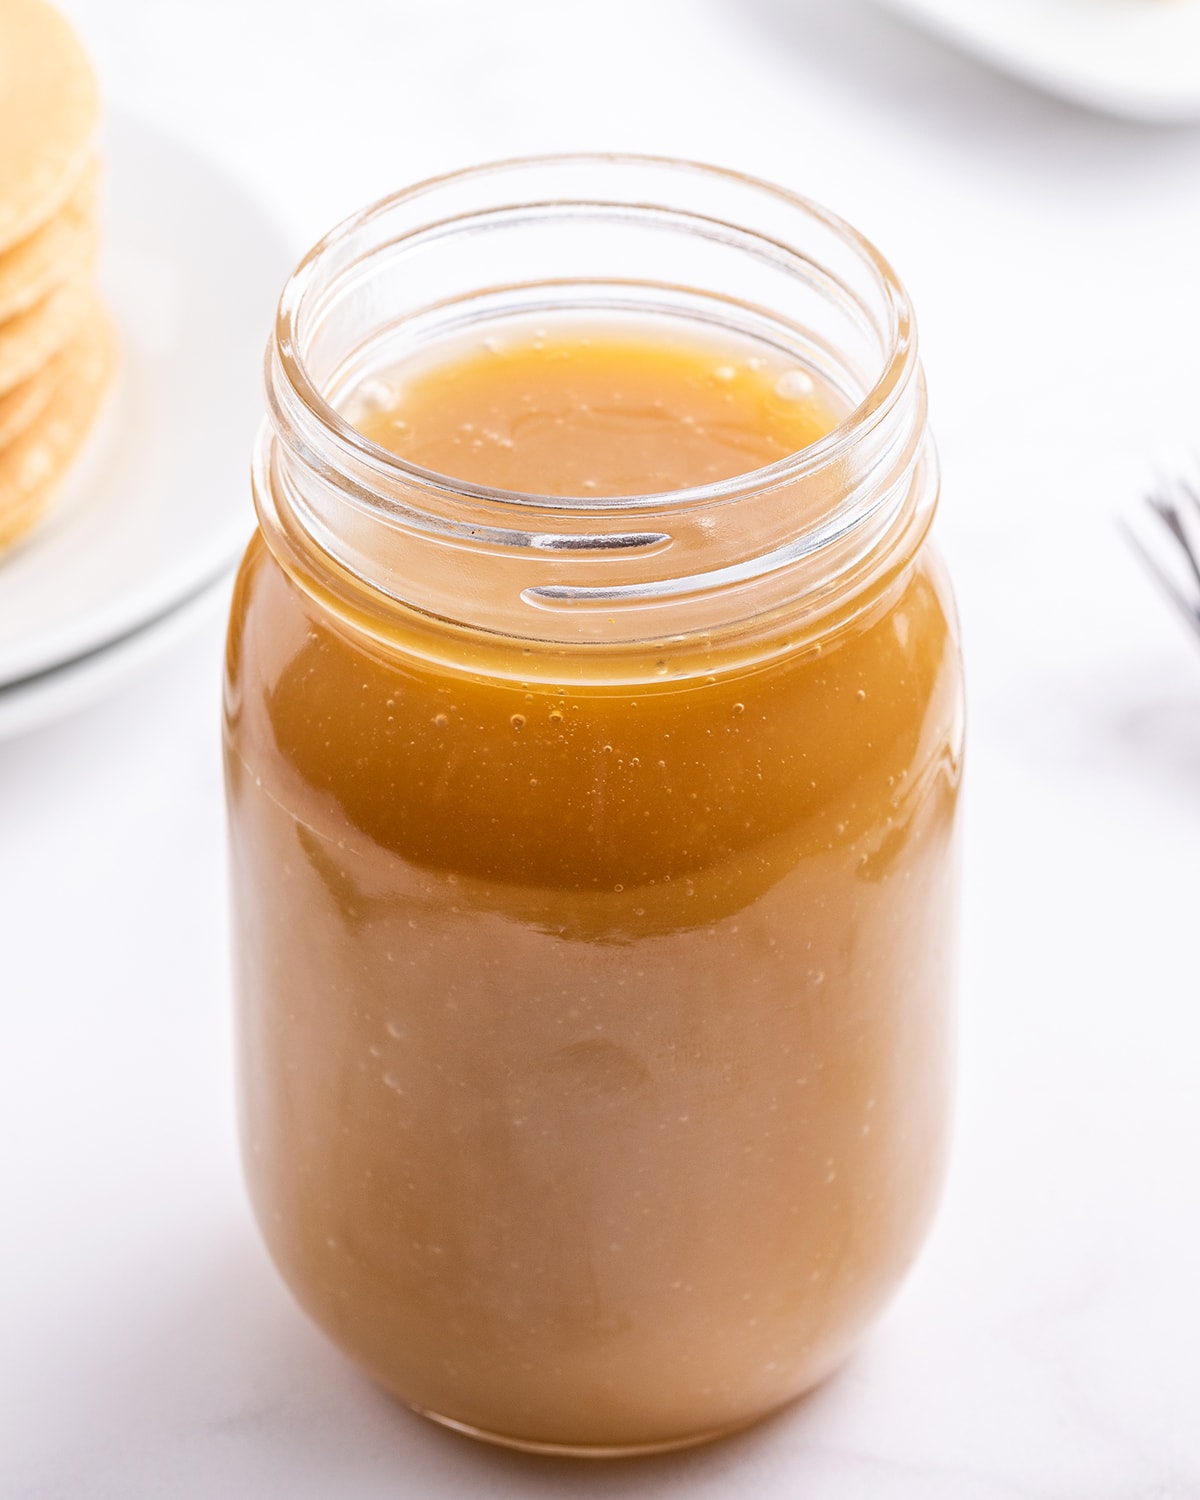 A jar of buttermilk syrup without a lid on it.